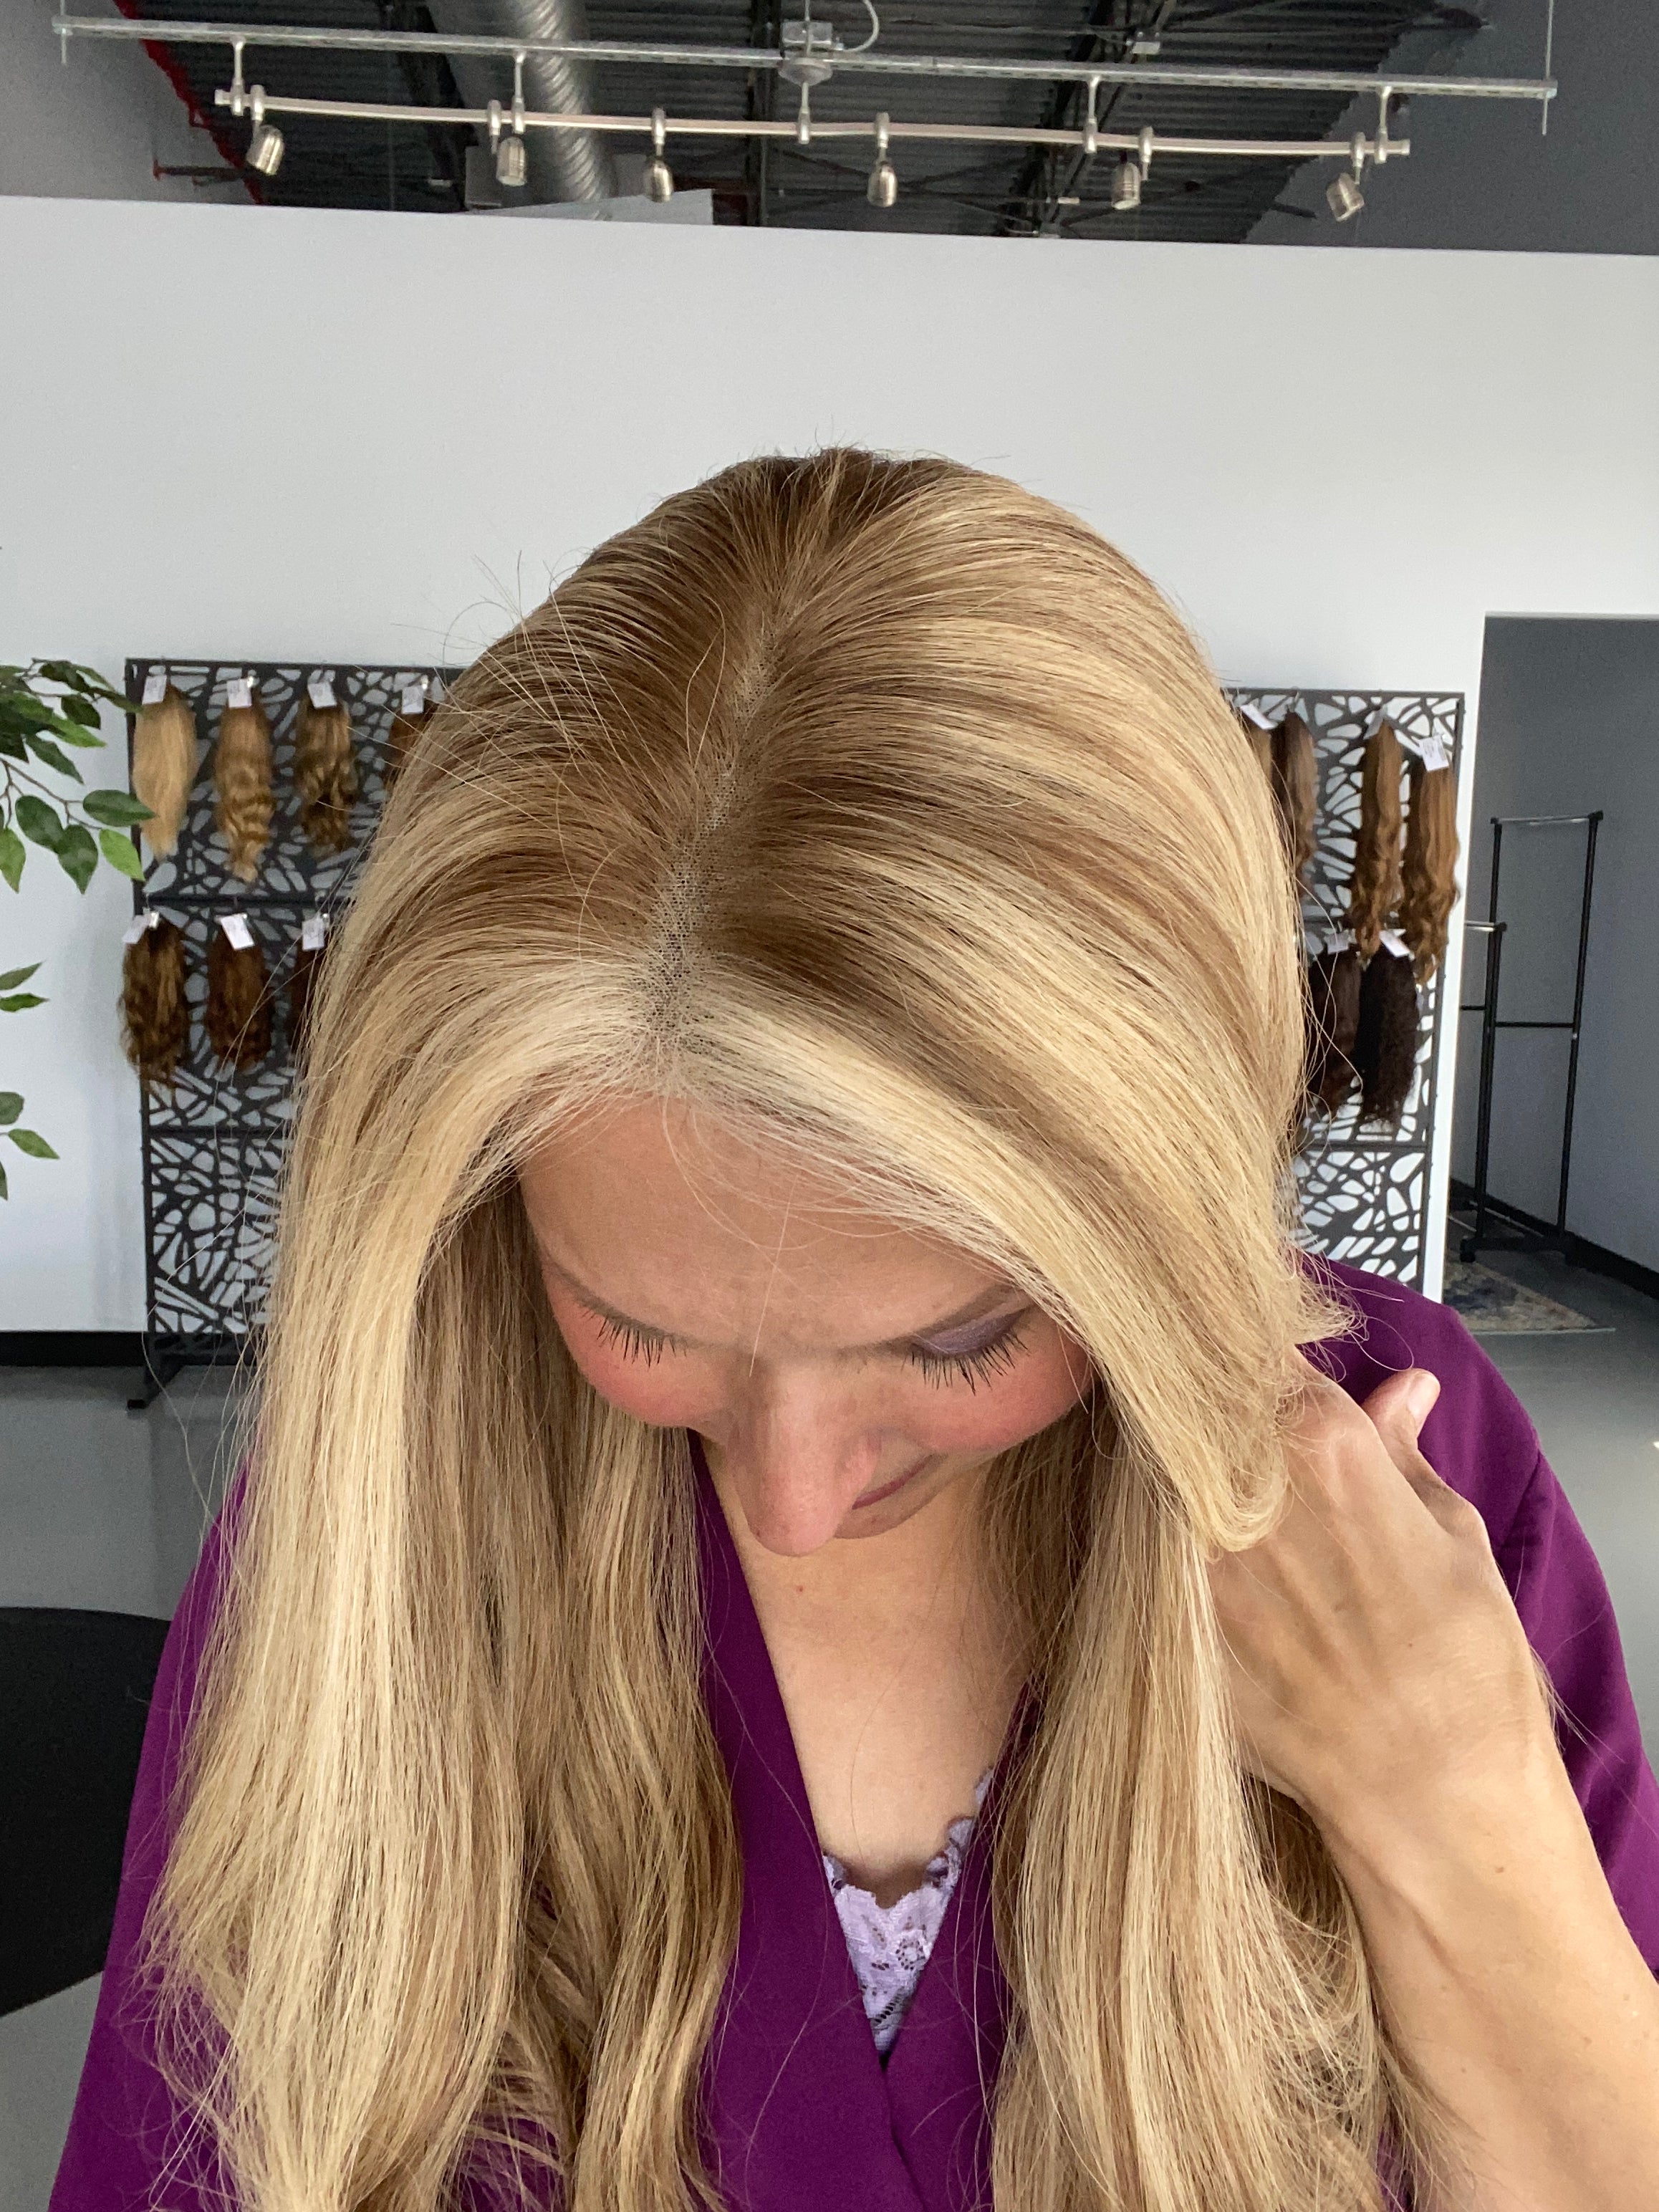 Closed Lace Topper - Warm Level 7 with Golden Blonde Highlights, 8x8, 18-22